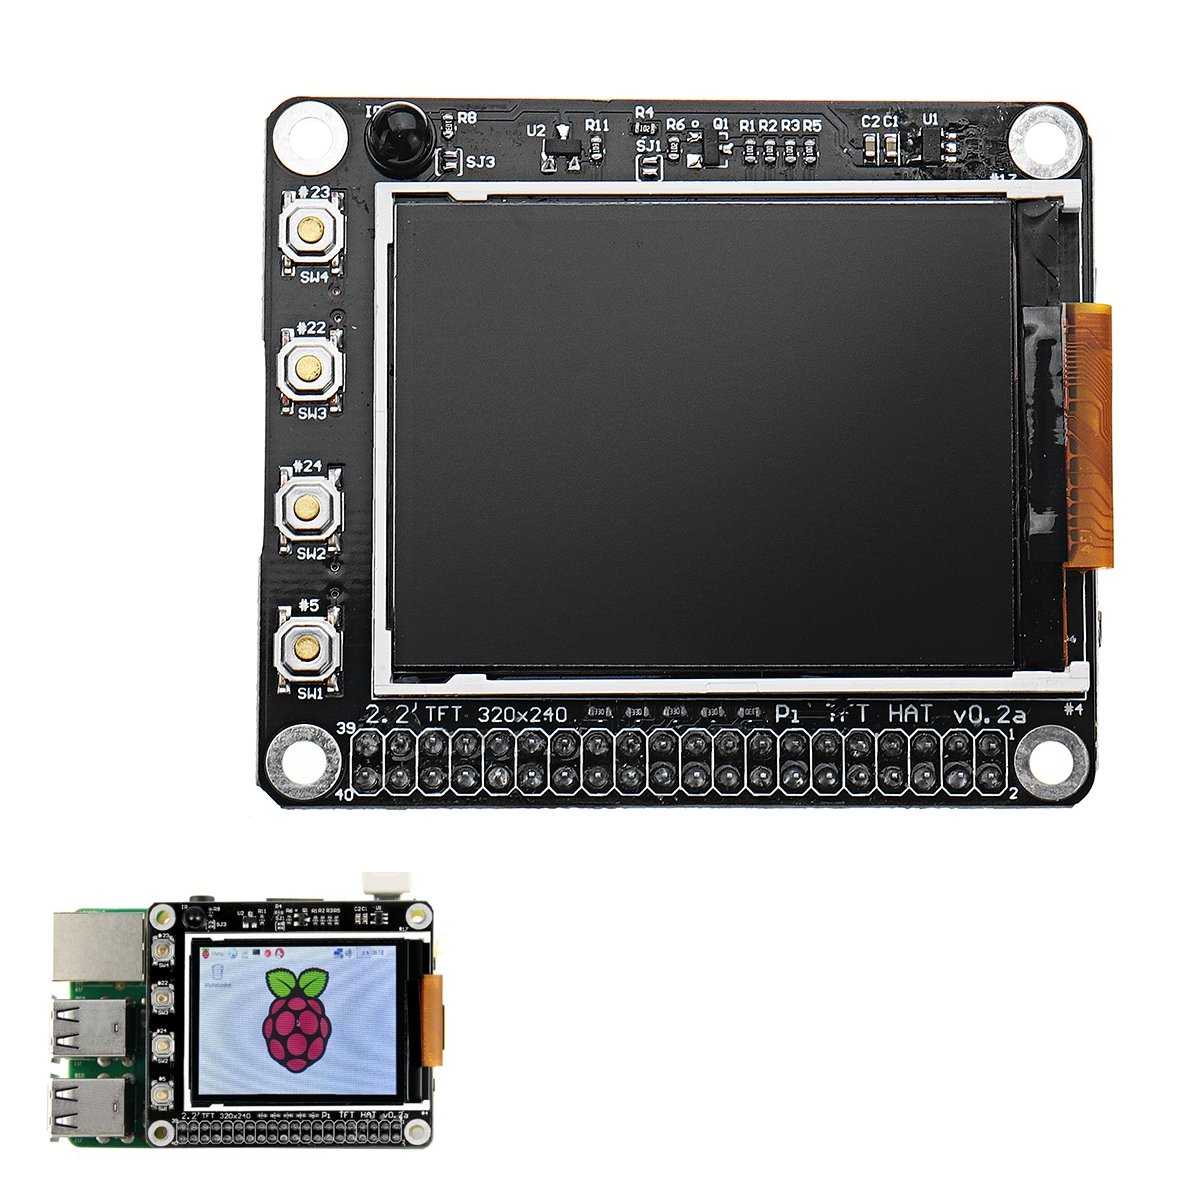 2.2 inch 320x240 TFT Screen LCD Display Hat With Buttons IR Sensor For Raspberry Pi 3/2B/B+/A+ 1